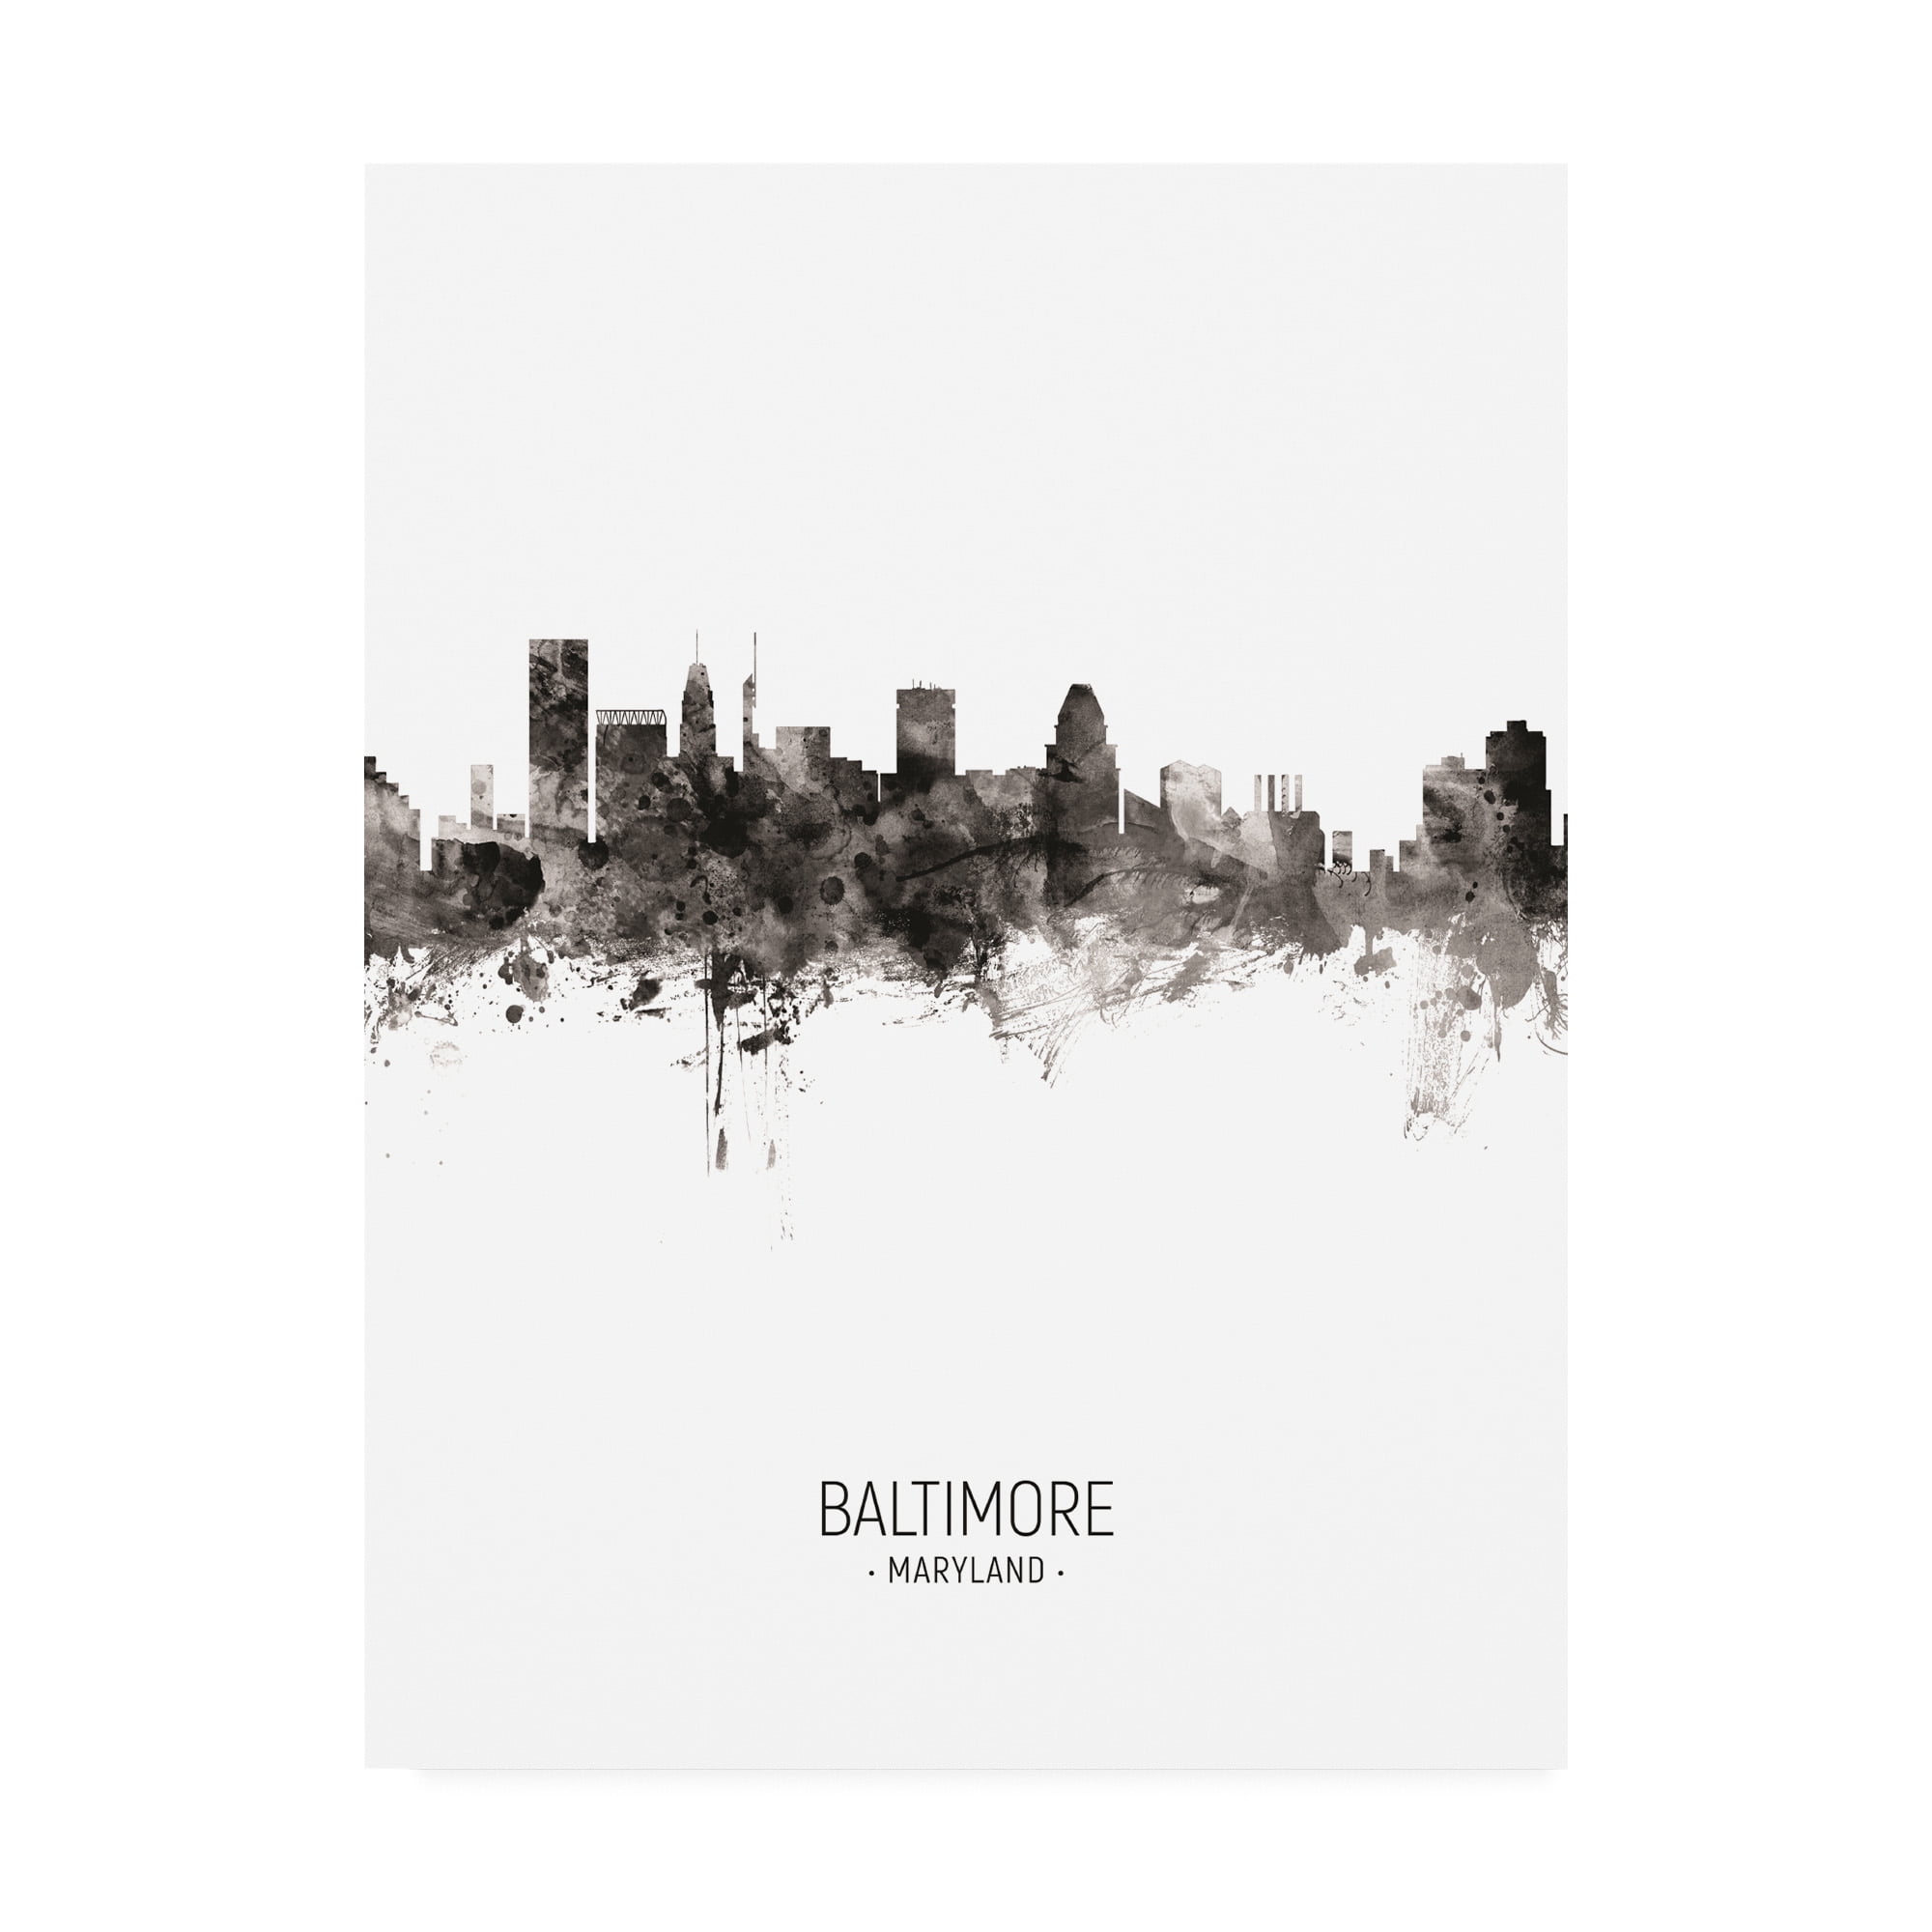 Skyline at Night Baltimore 24x36 Giclee Gallery Print, Wall Decor Travel Poster Maryland 